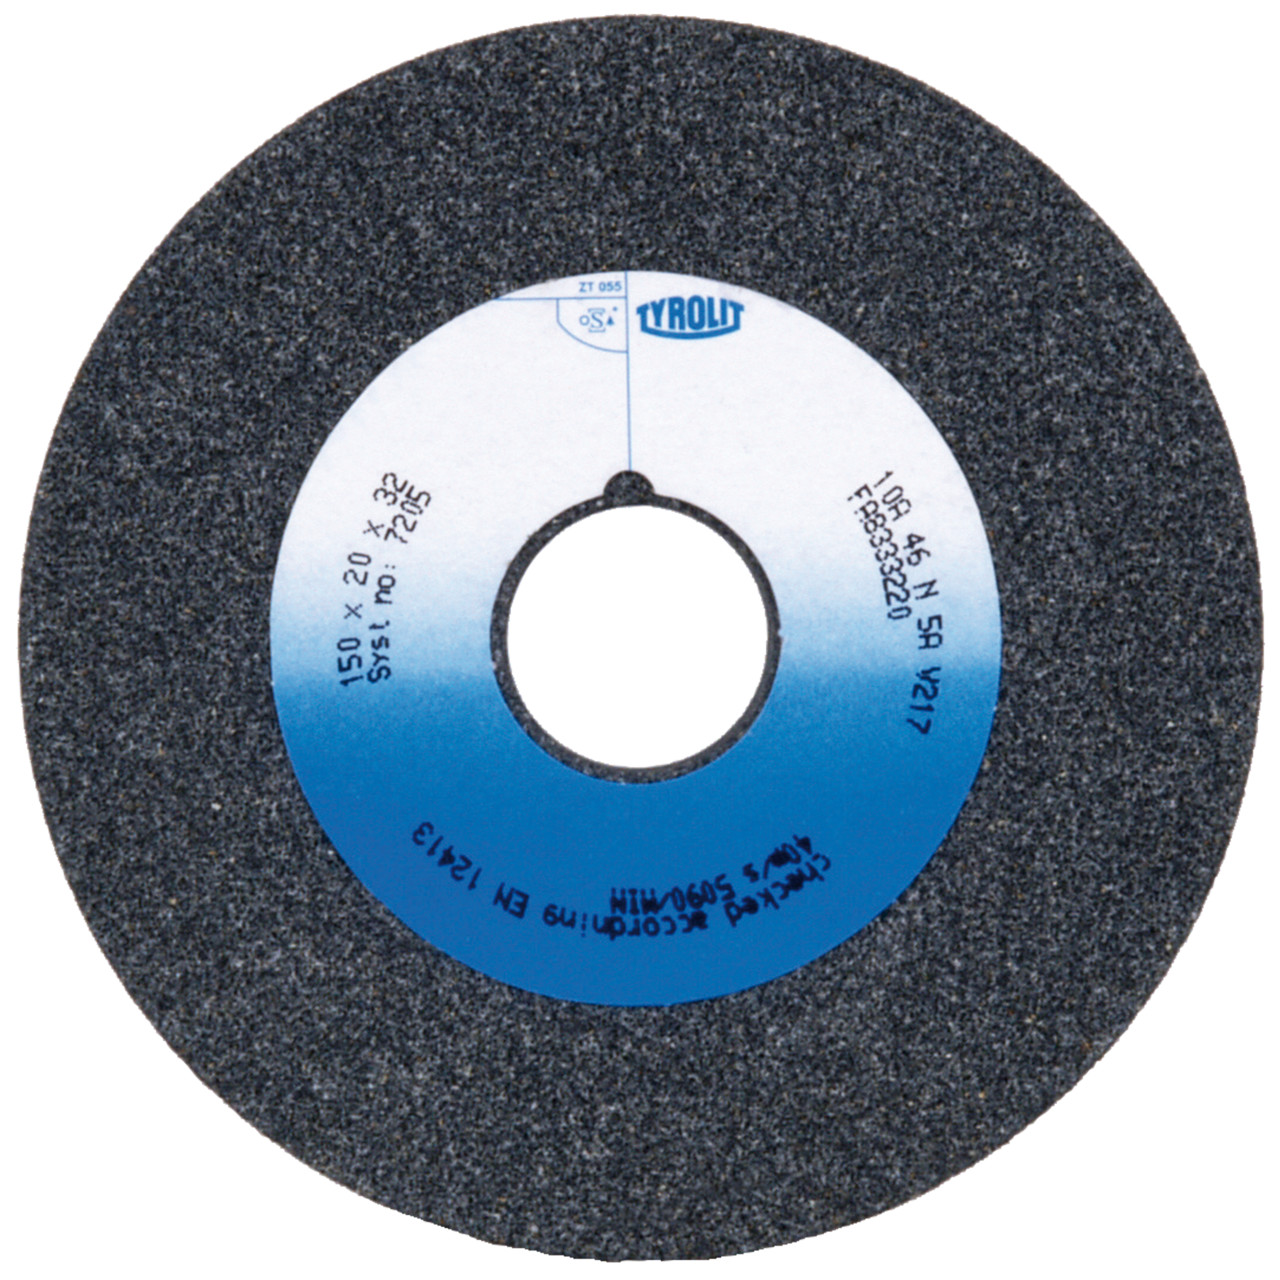 Tyrolit Conventional ceramic grinding discs DxDxH 200x25x51 For unalloyed and low-alloy steels, shape: 1, Art. 116708